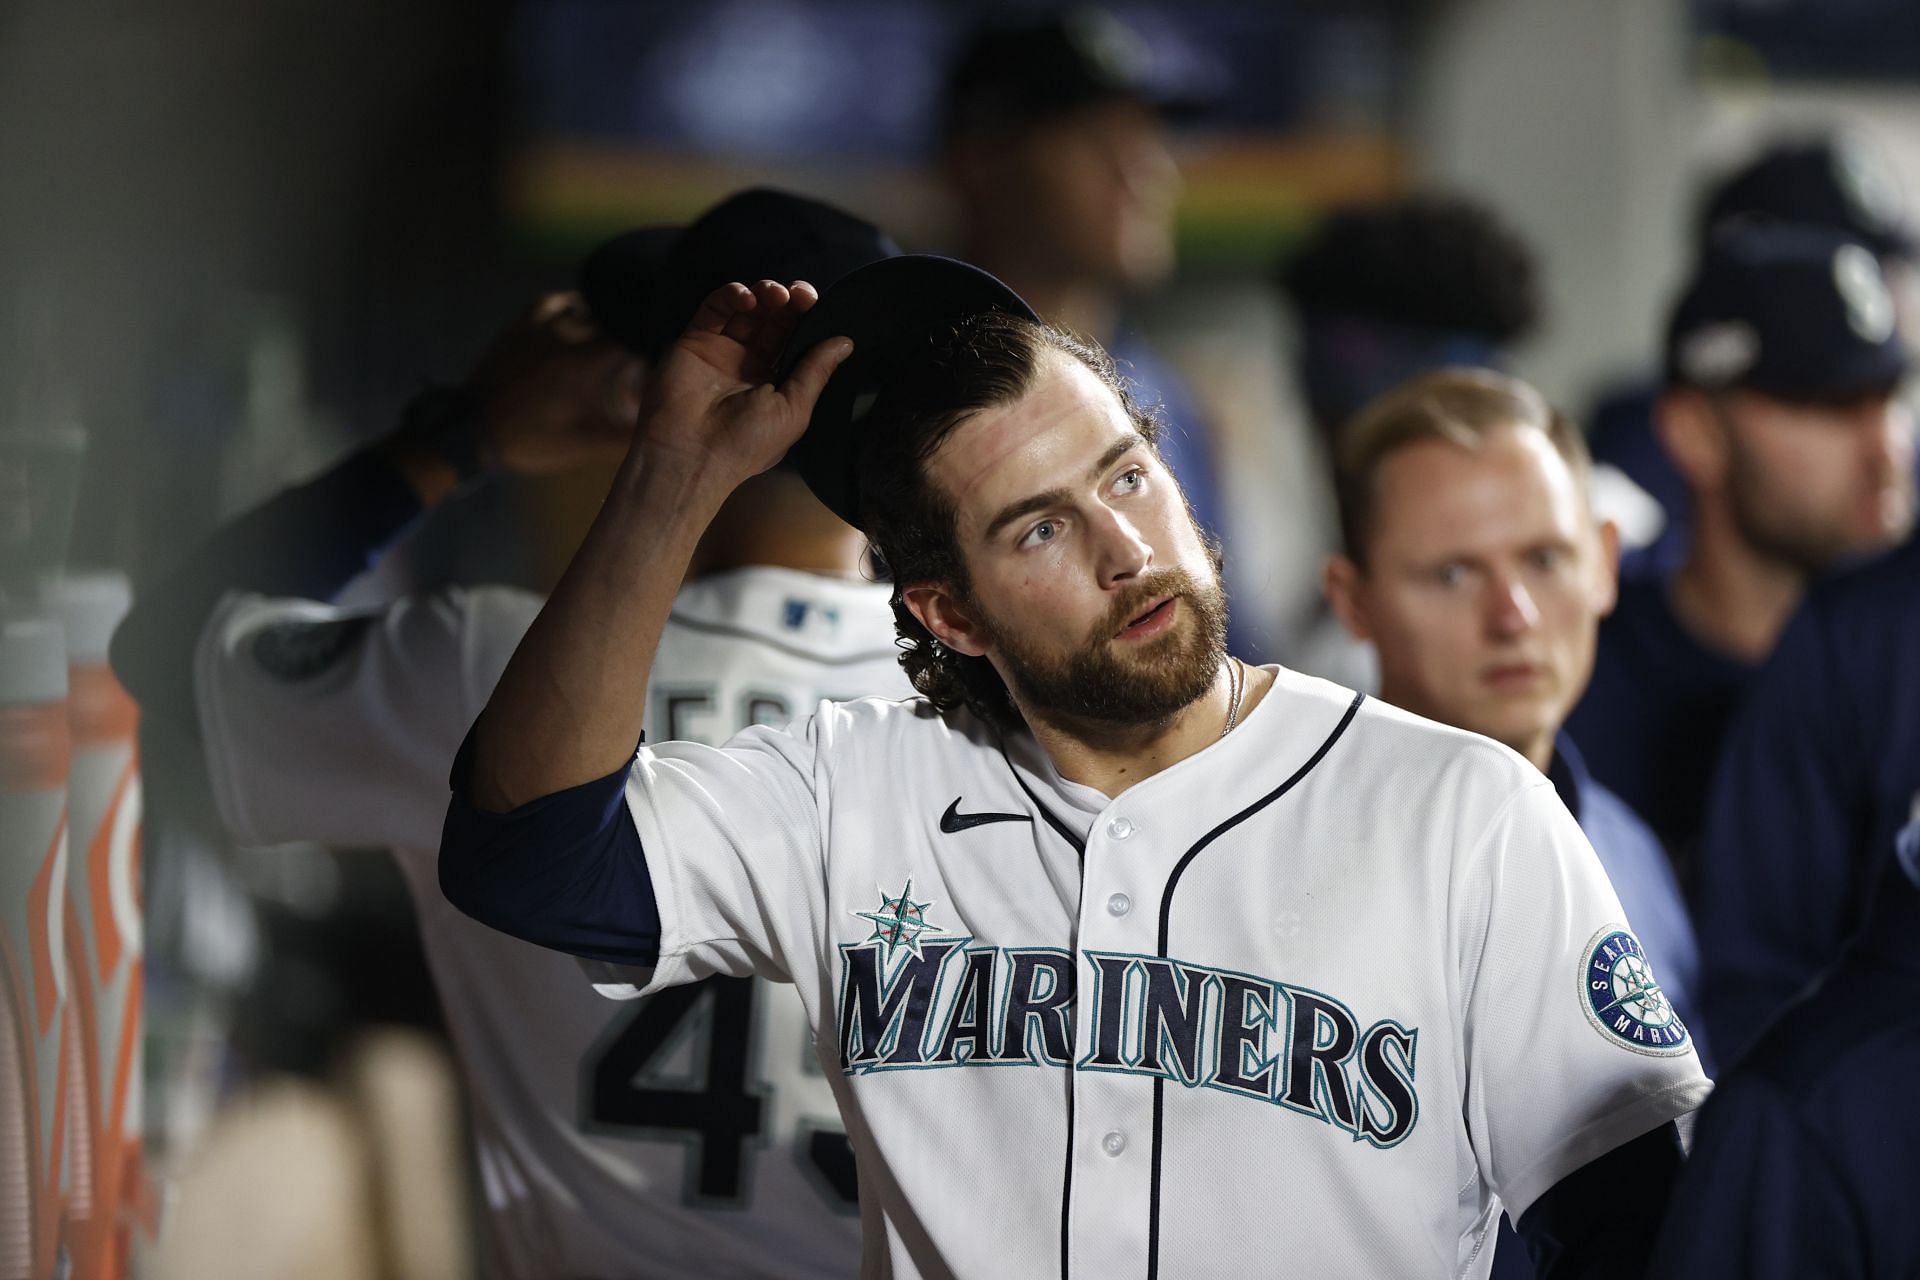 Mariners players express disappointment about Blue Jays merch at Seattle  team store